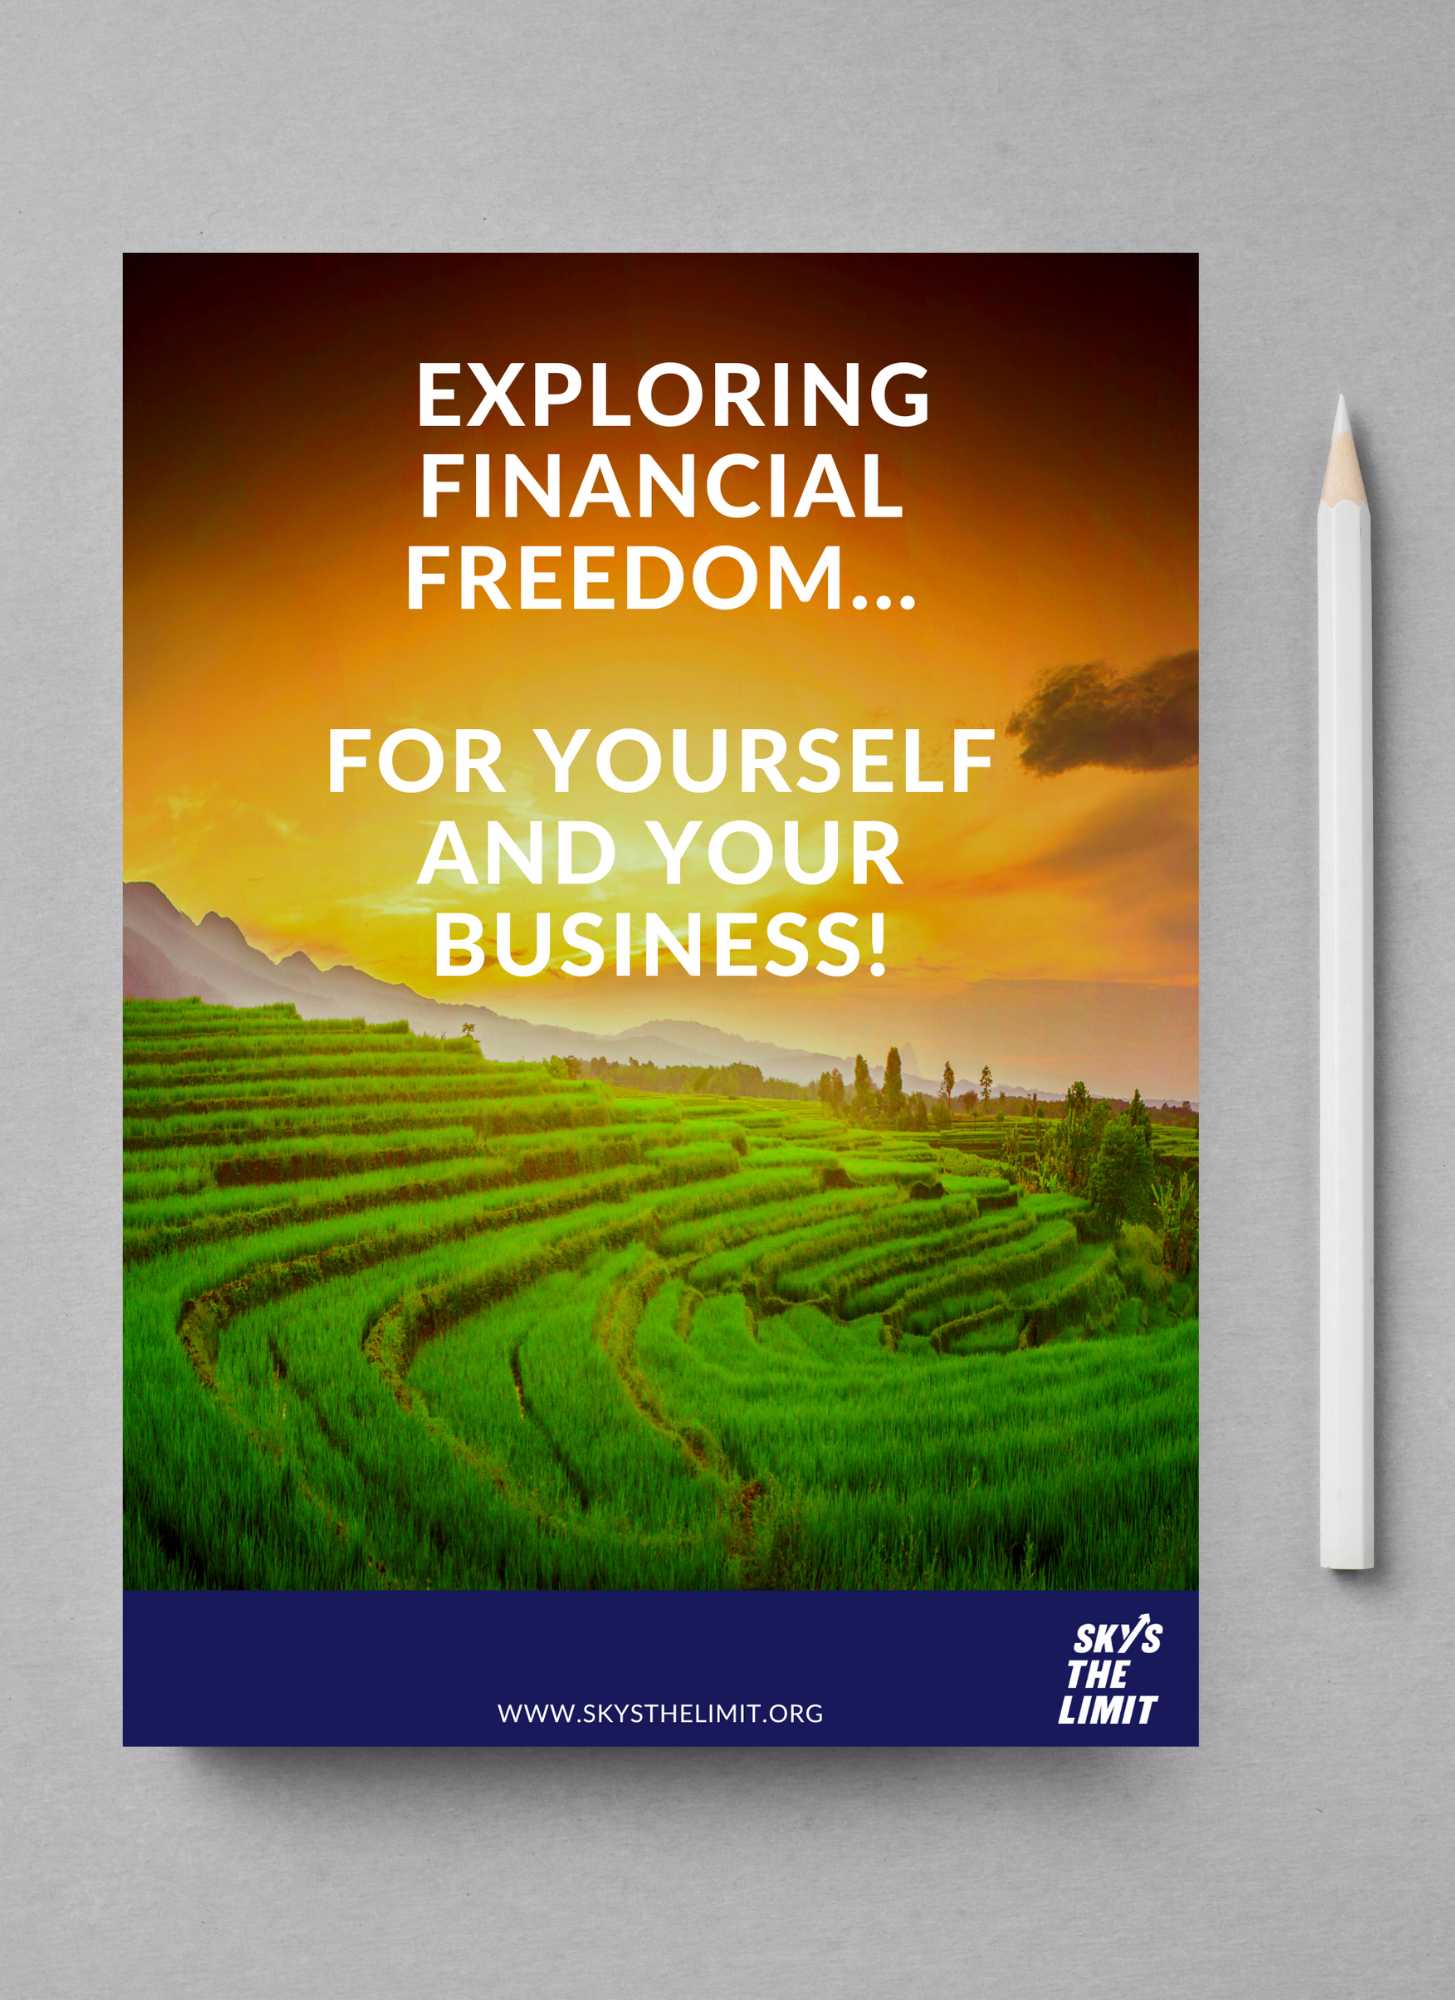 Exploring Financial Freedom...For Yourself and Your Business